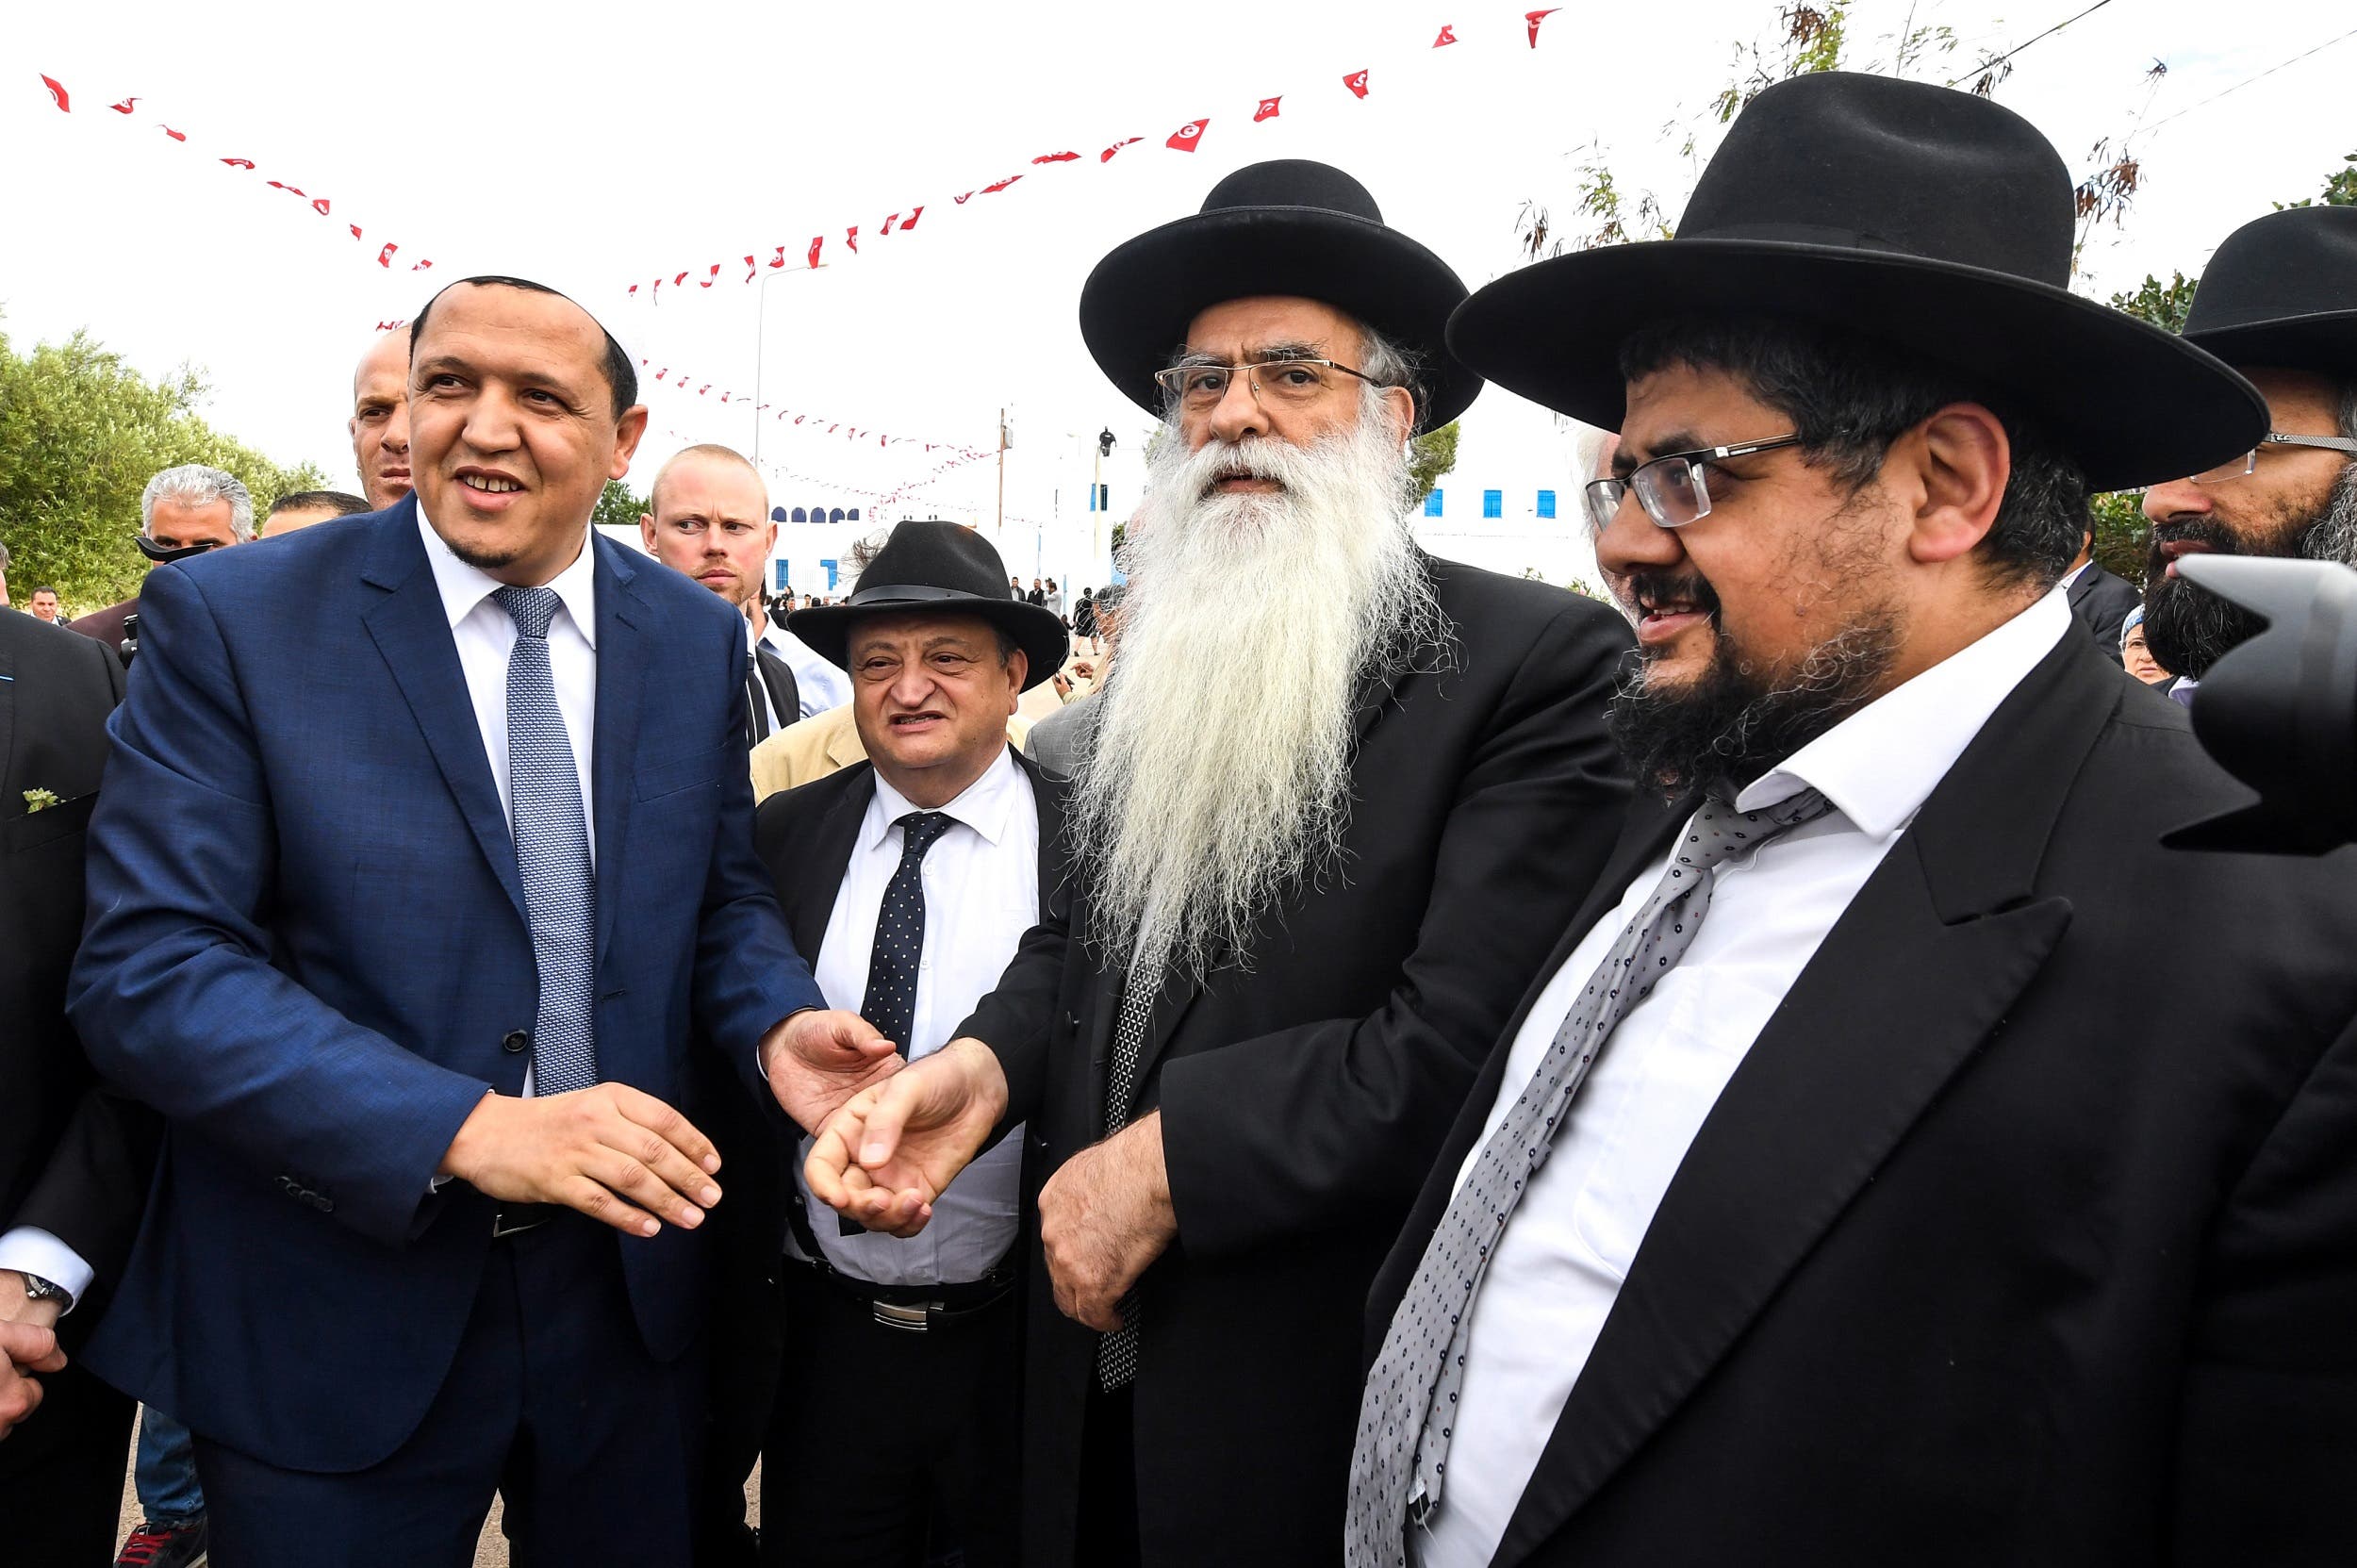 Hassen Chalghoumi (L), the administrative responsible of the municipal Drancy mosque in Seine-Saint-Denis, greets Israeli rabbi Raphael Cohen (C) and his delegation at the Ghriba Synagogue on May 2, 2018. (AFP)